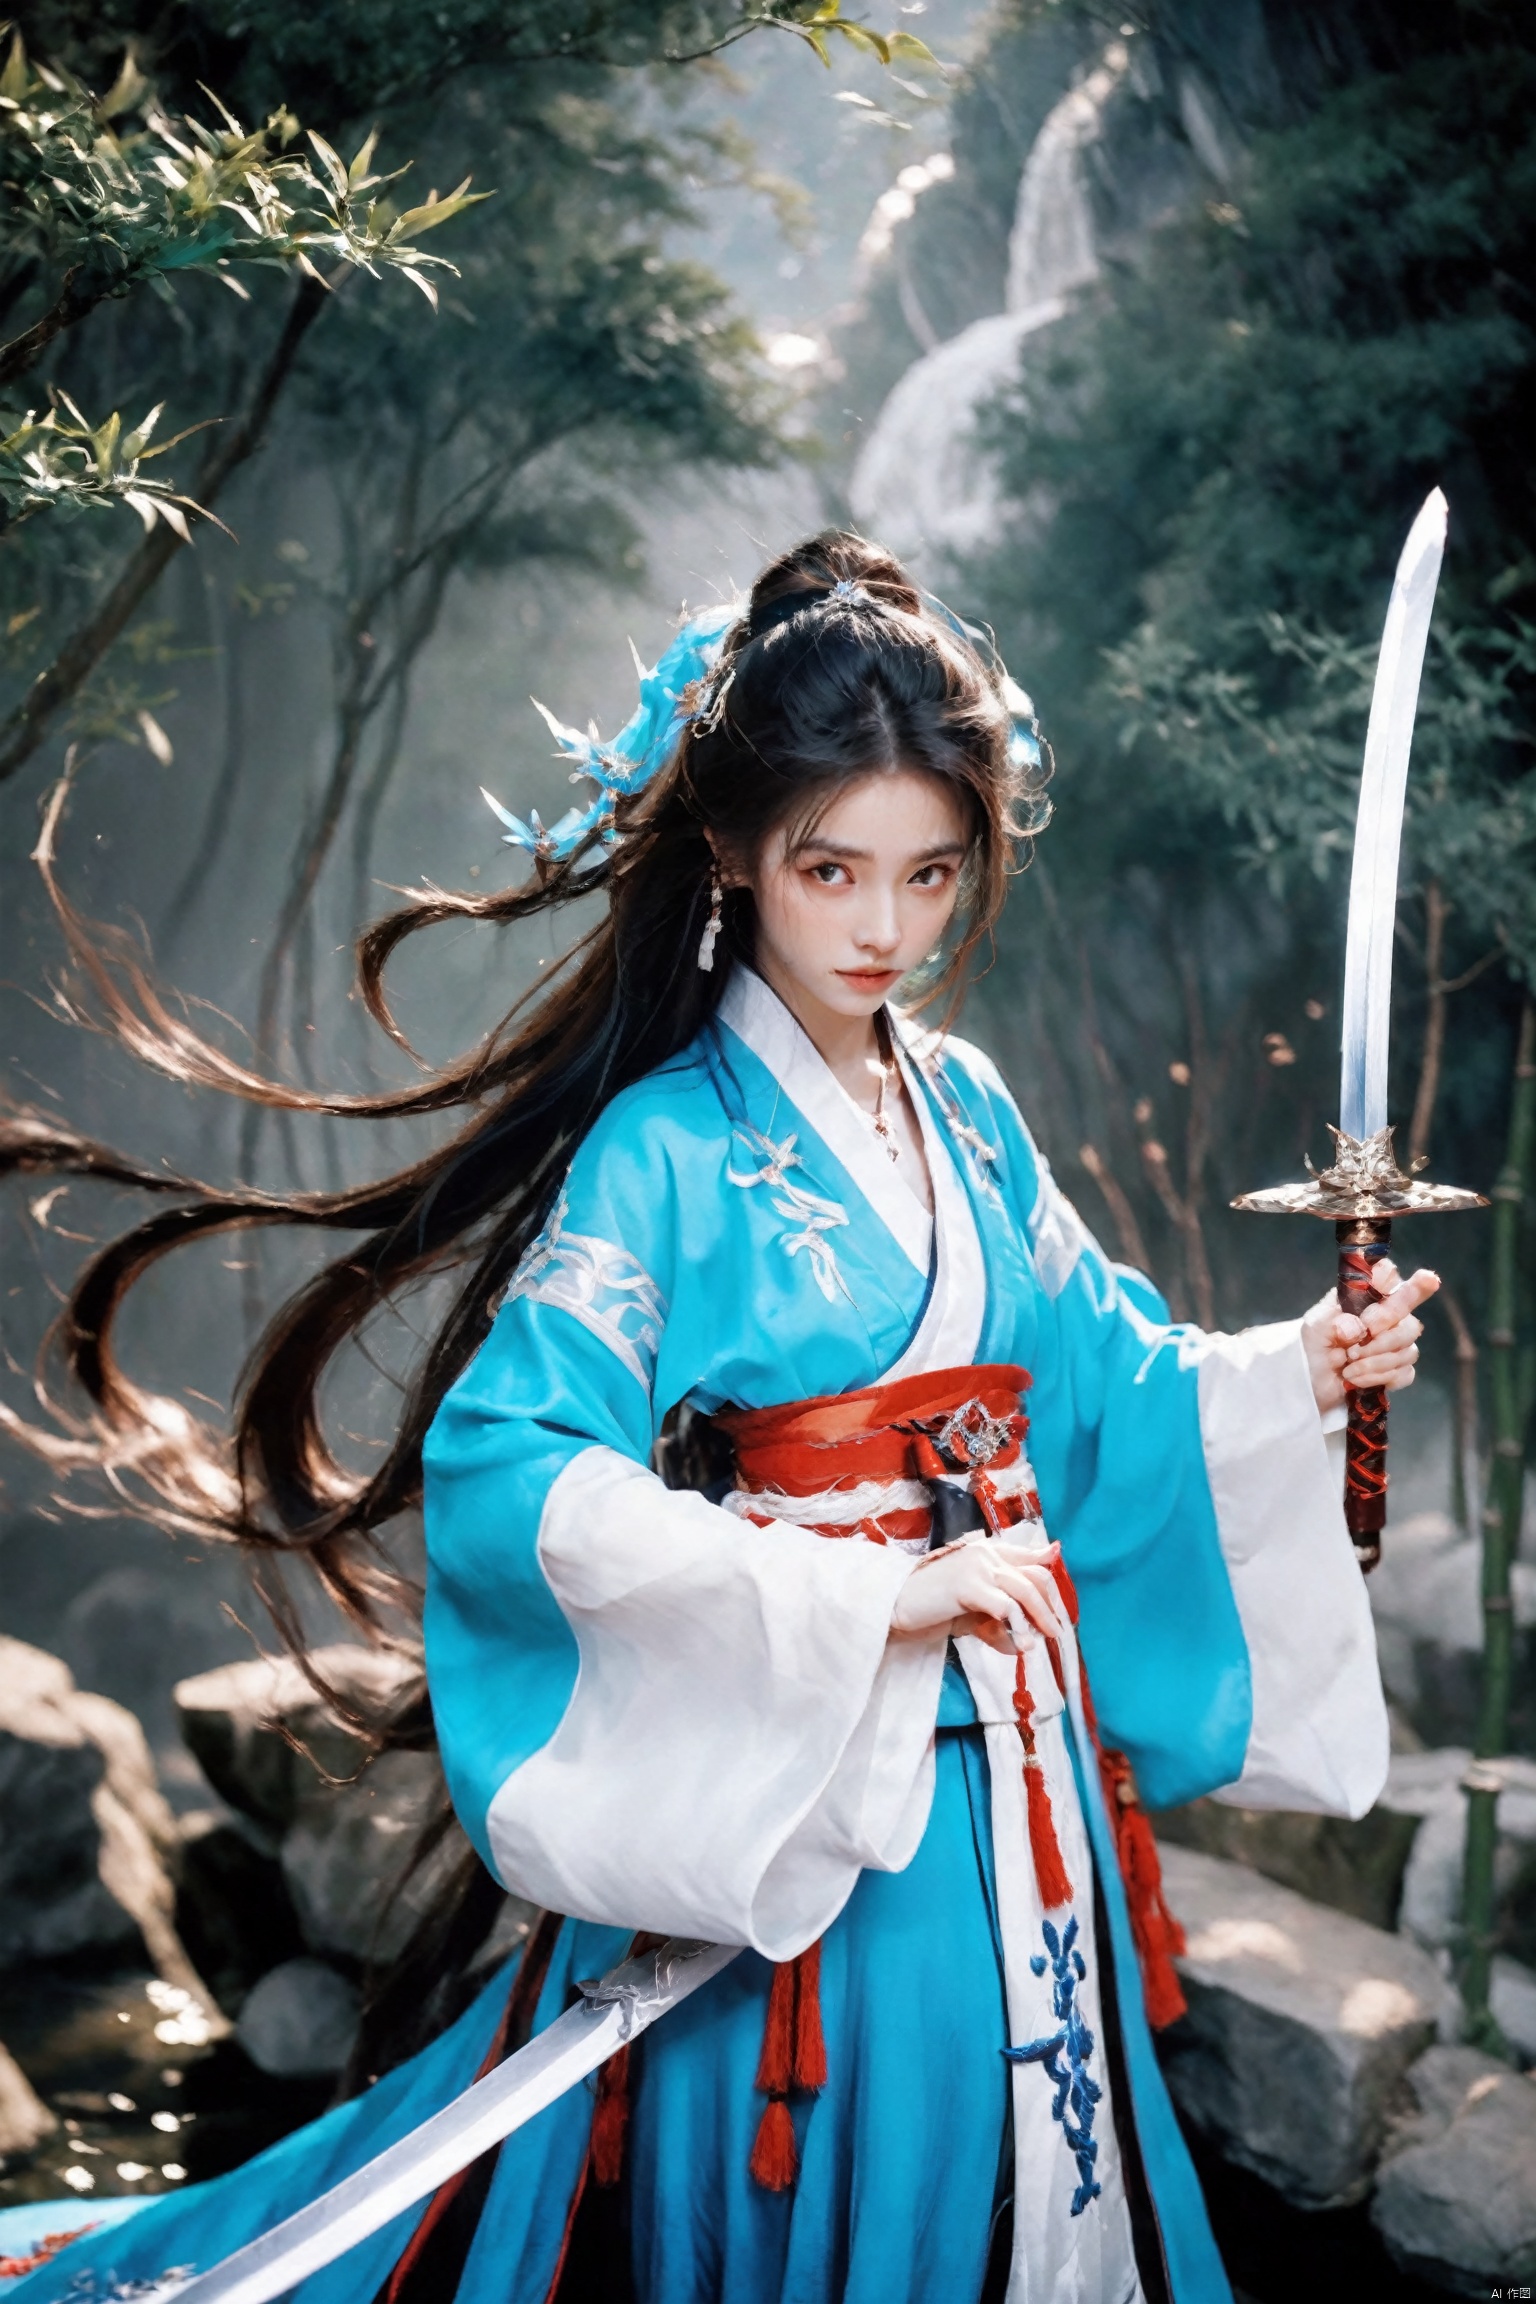  1 girl, Asian, cosplay, Lin Yueru (The Legend of Sword and Fairy), martial arts stance, sword in hand, determined expression, long flowing hair, traditional attire, embroidered robe, sash, hairpin, delicate features, focused eyes, elegant movements, bamboo forest, falling leaves, moonlit night, ancient temple, jianjue